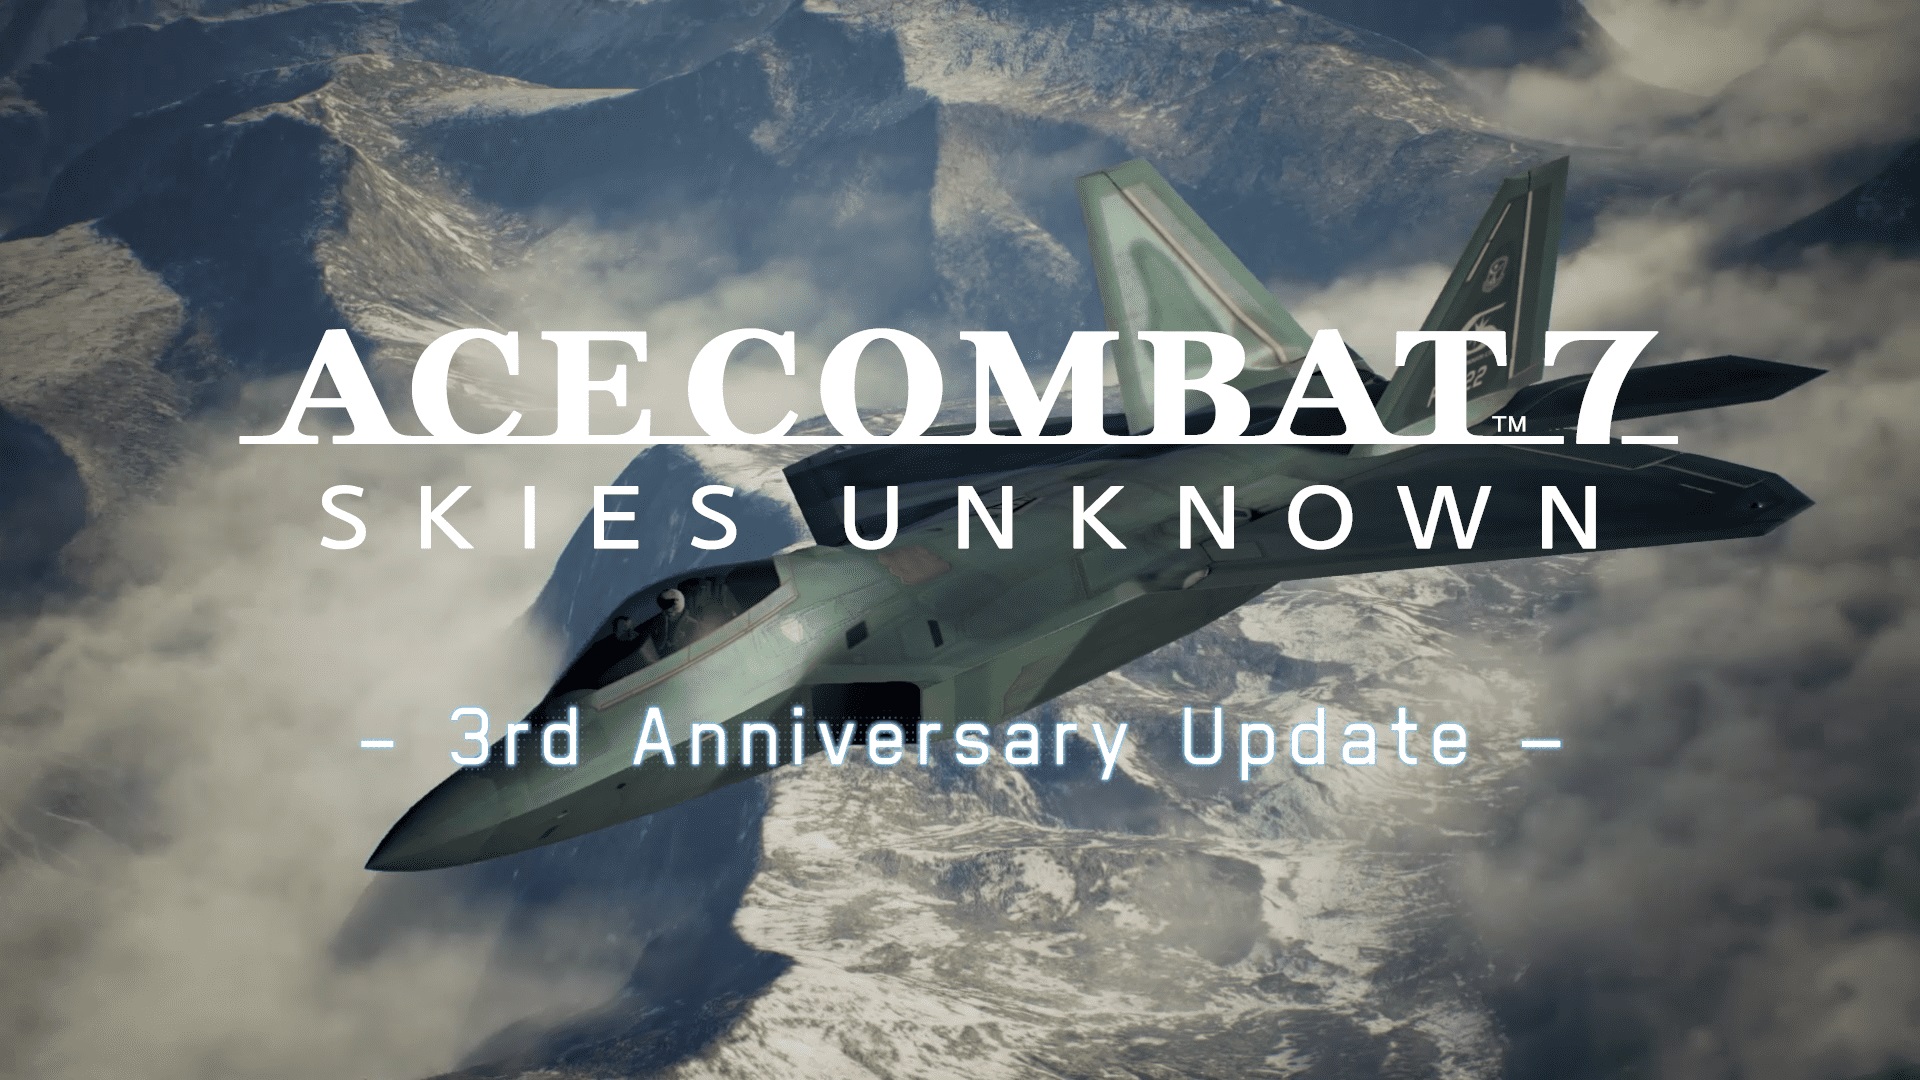 Ace Combat 7 Skies Unknown - Ps4